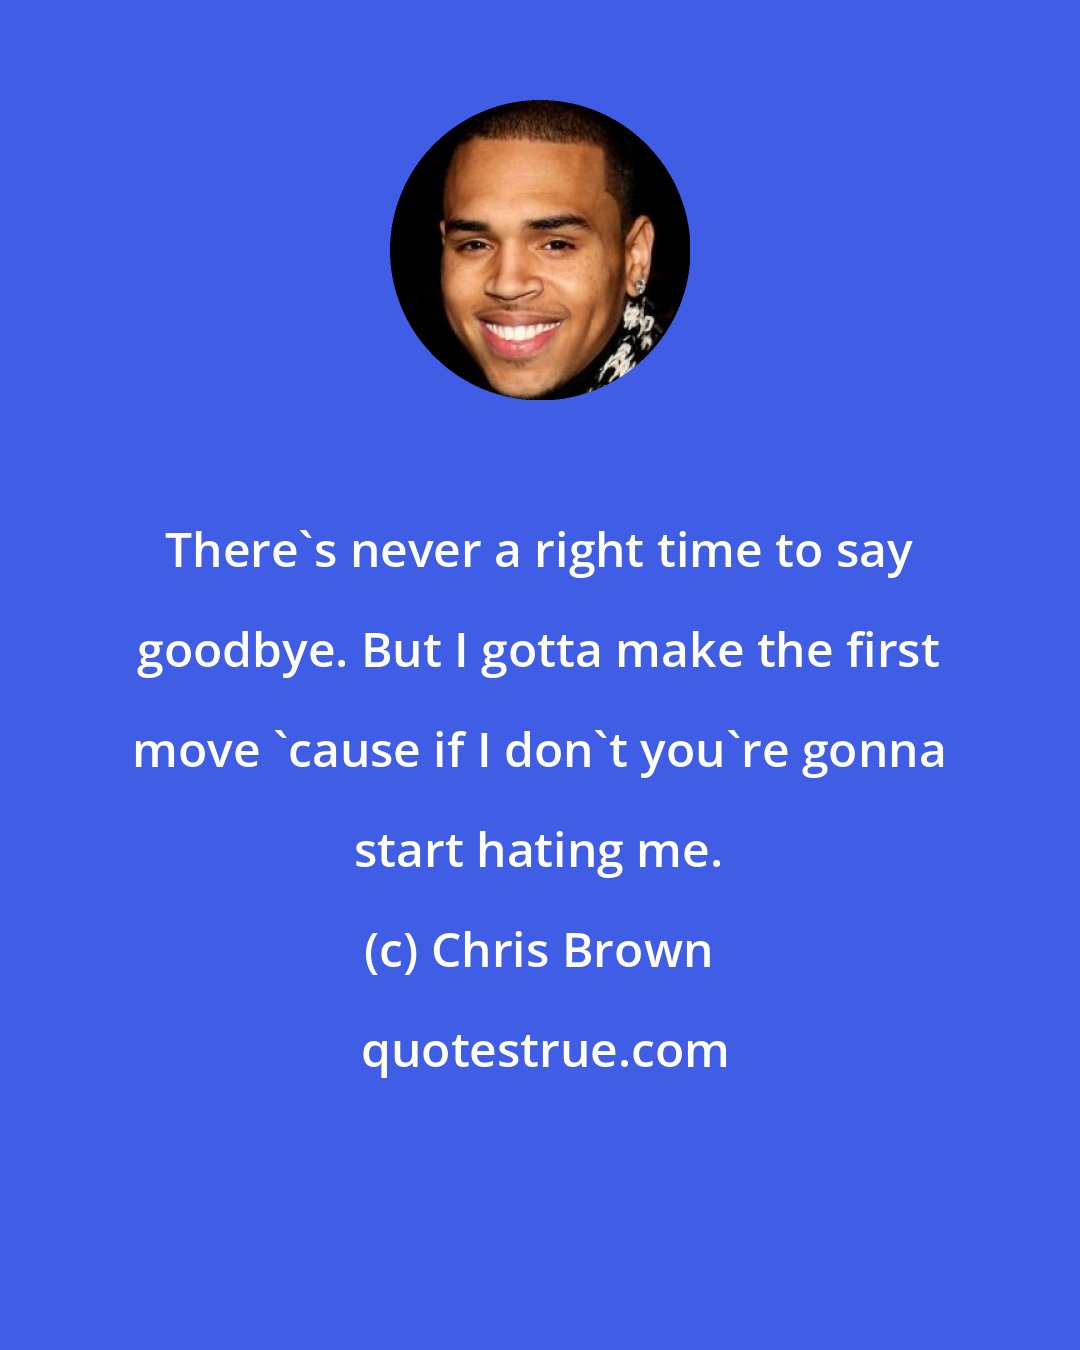 Chris Brown: There's never a right time to say goodbye. But I gotta make the first move 'cause if I don't you're gonna start hating me.